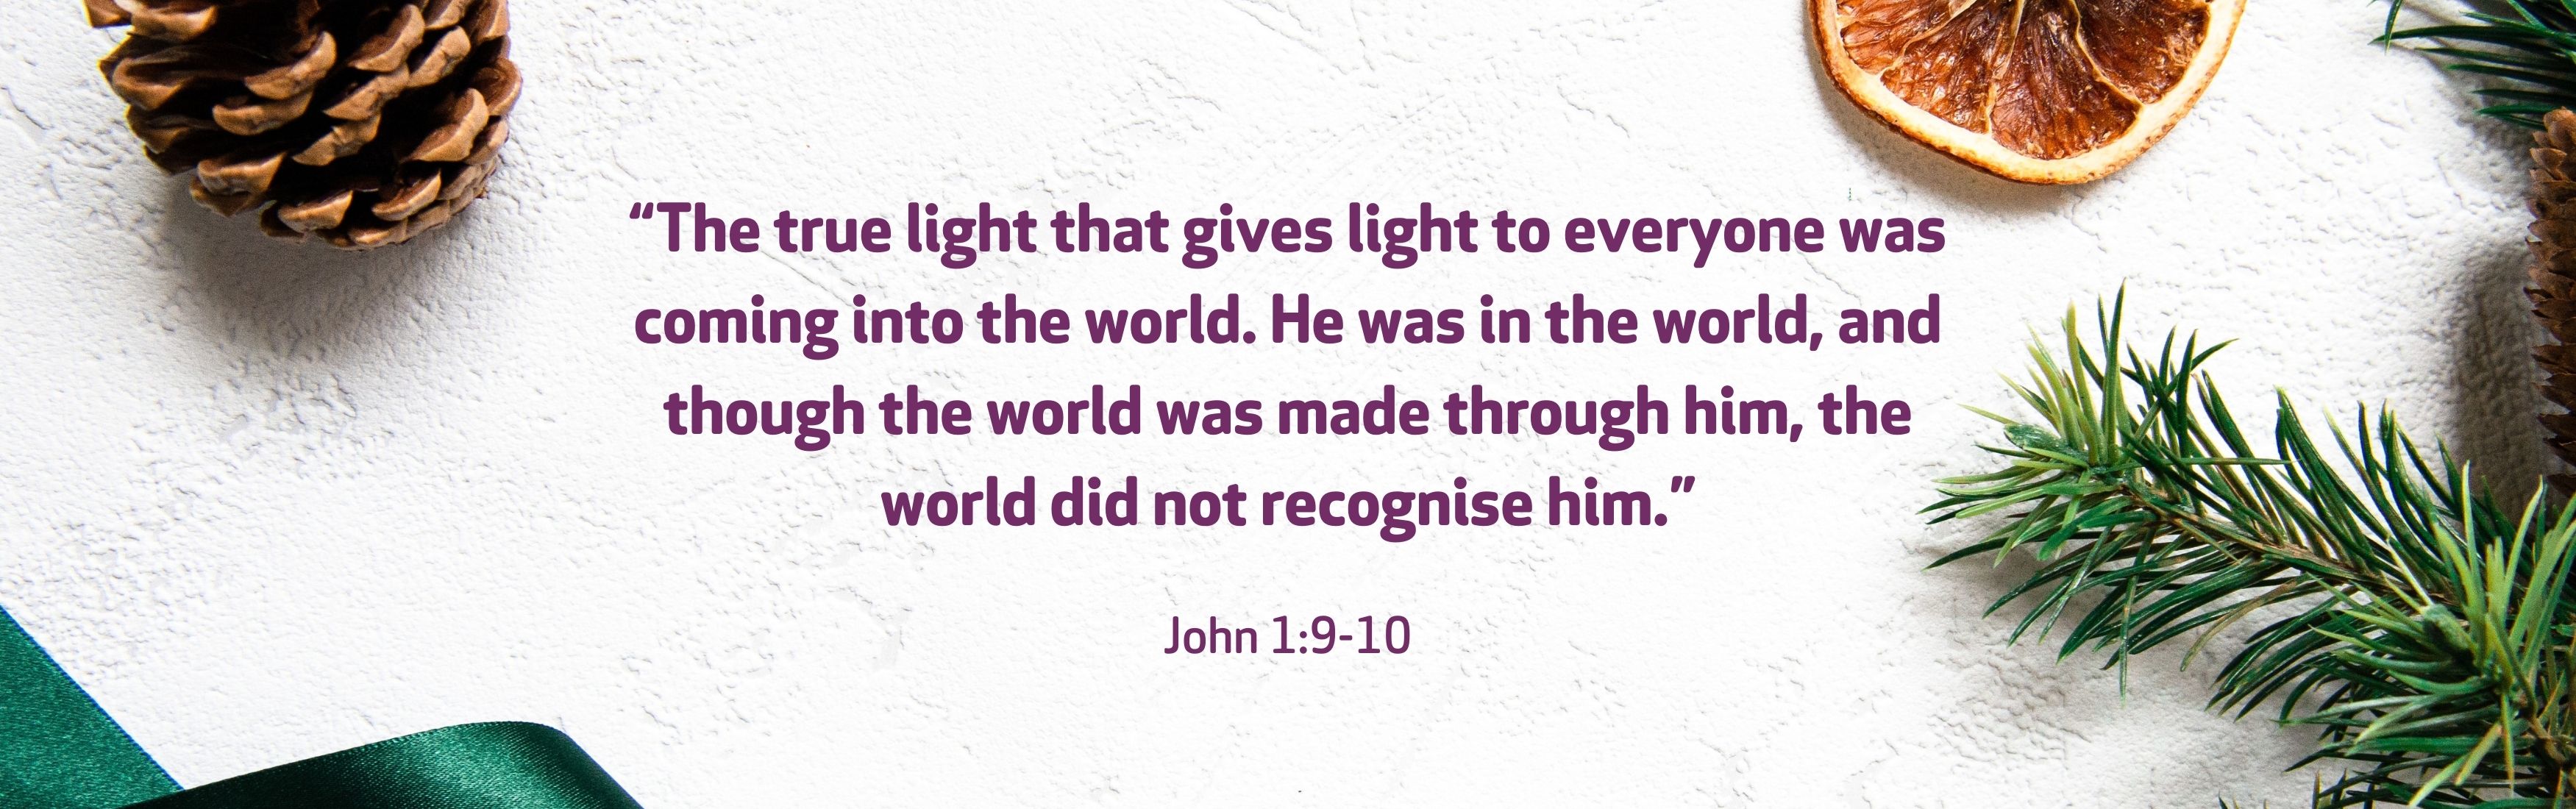 “The true light that gives light to everyone was coming into the world. He was in the world, and though the world was made through him, the world did not recognise him.” John 1:9-10 